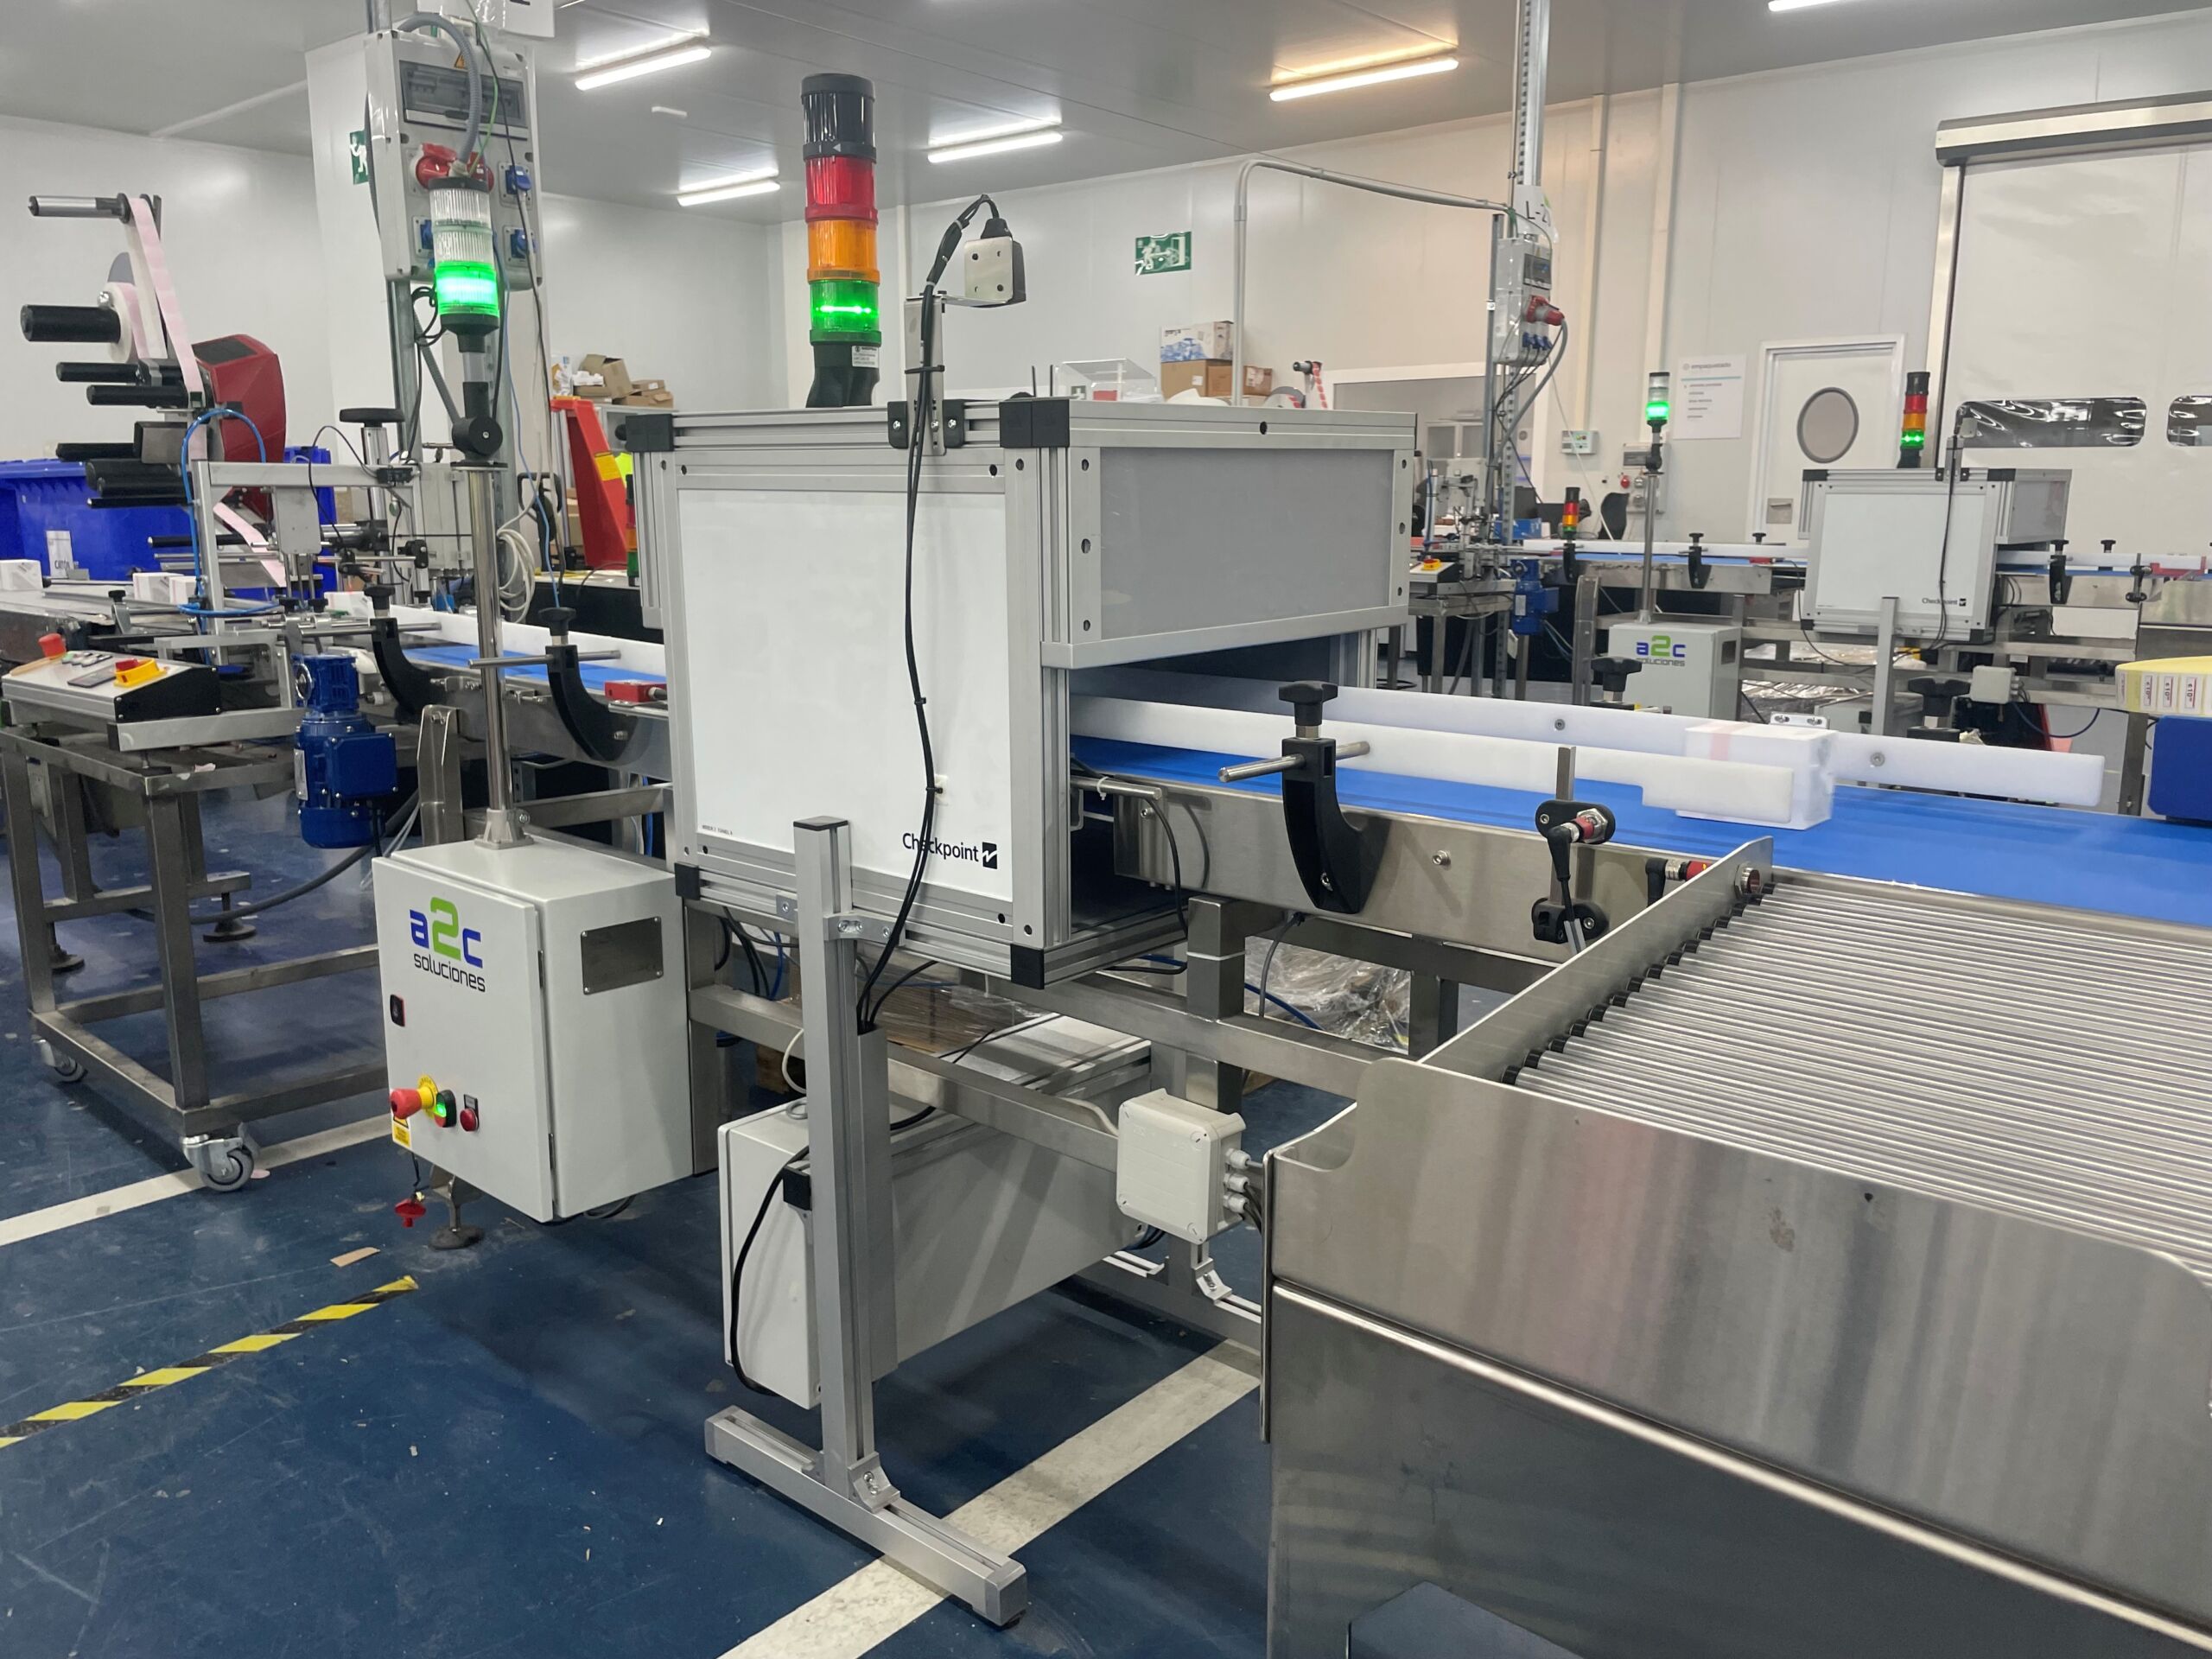 RFID coding tunnel integrated into the manufacturing line at Mixer & Pack